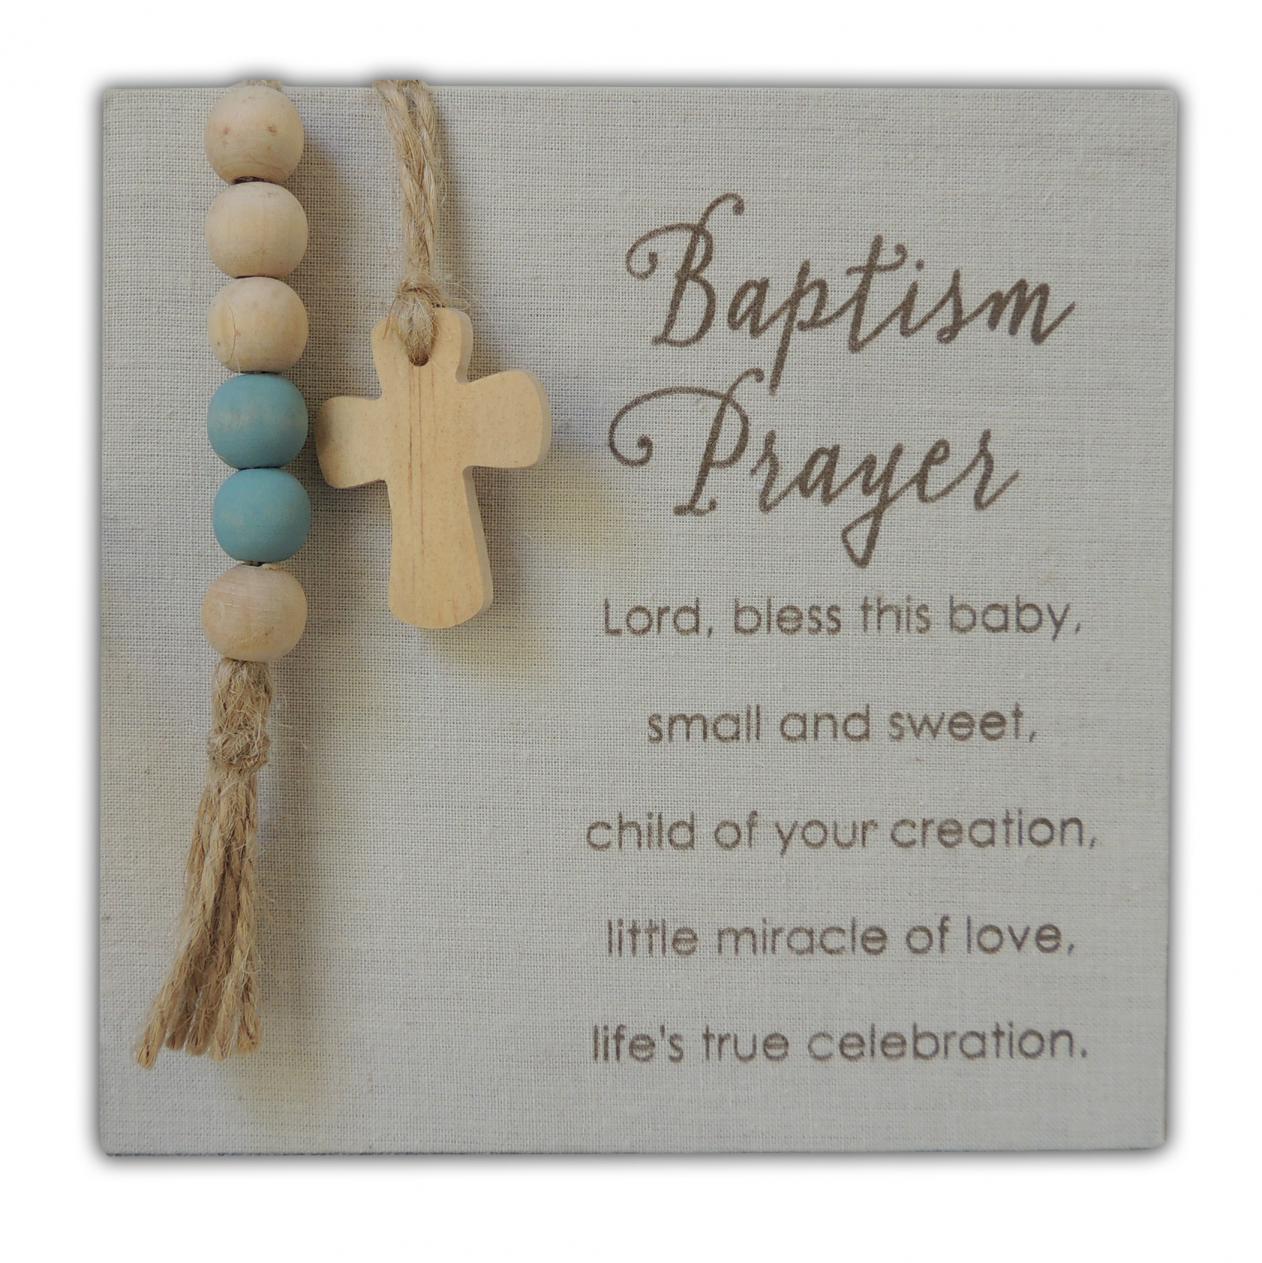 Baptism Boy - Wood Plaque, wrapped in fabric, adorned with jute, wood beads and cross. Ready to hang or stand 6x6in